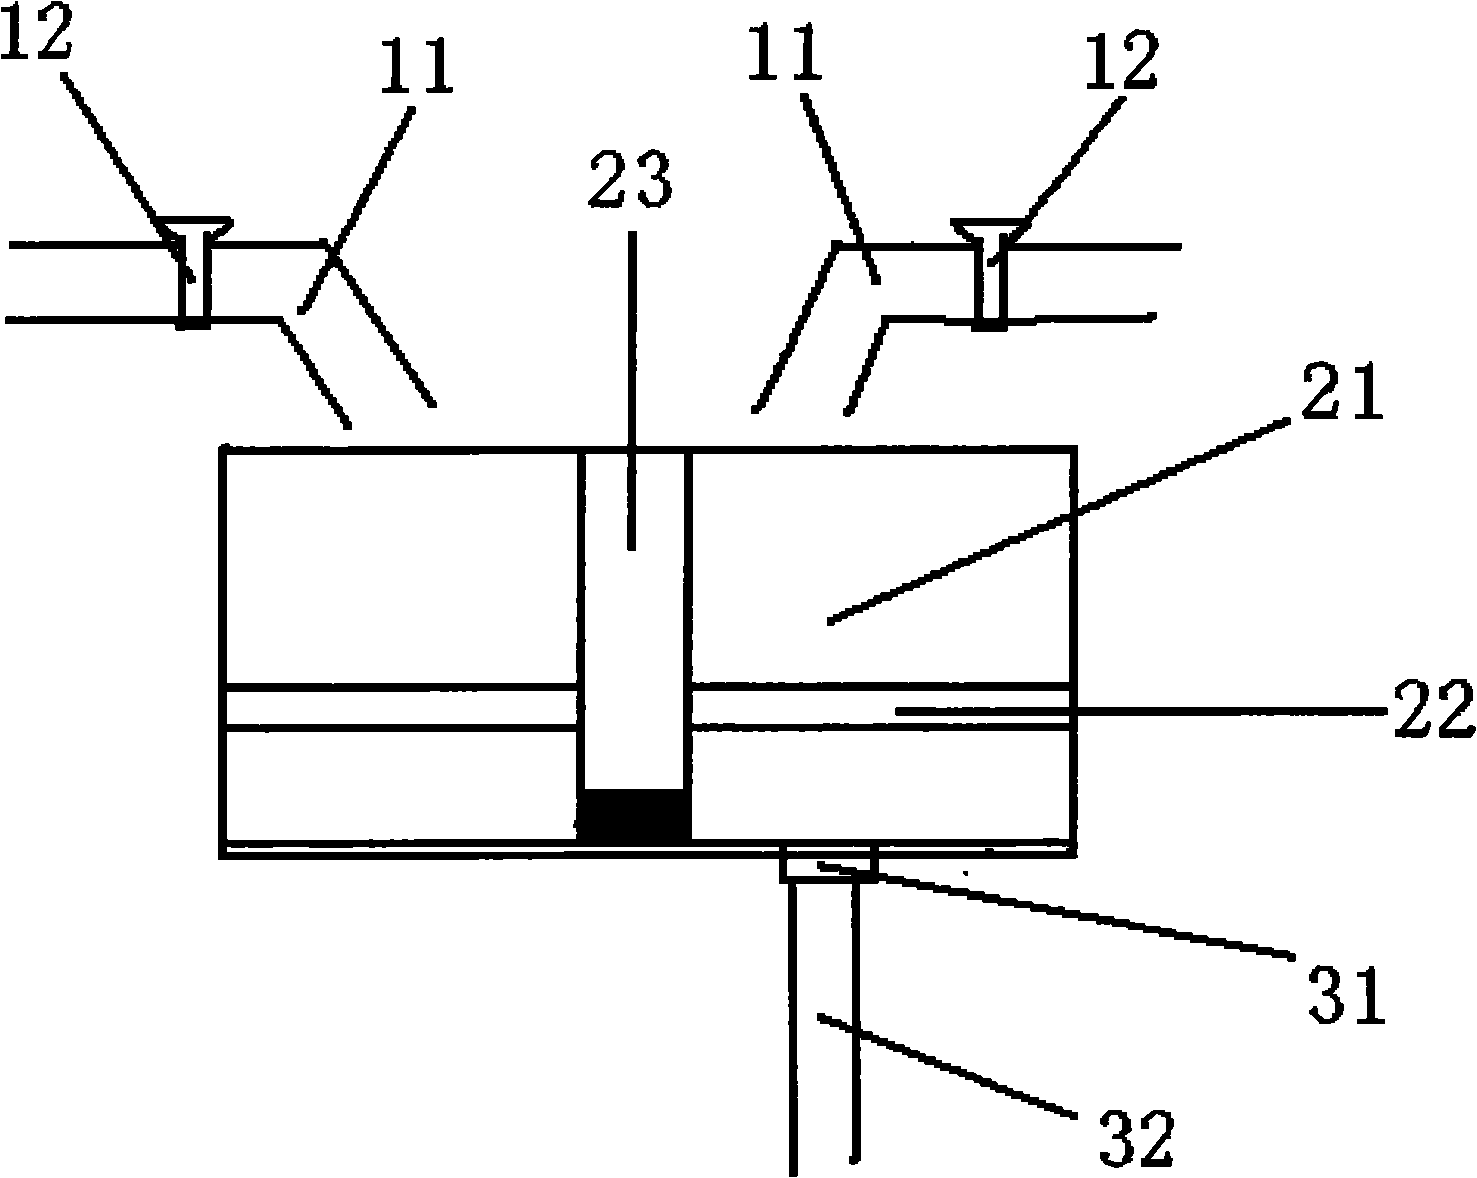 Control system of grain filler device